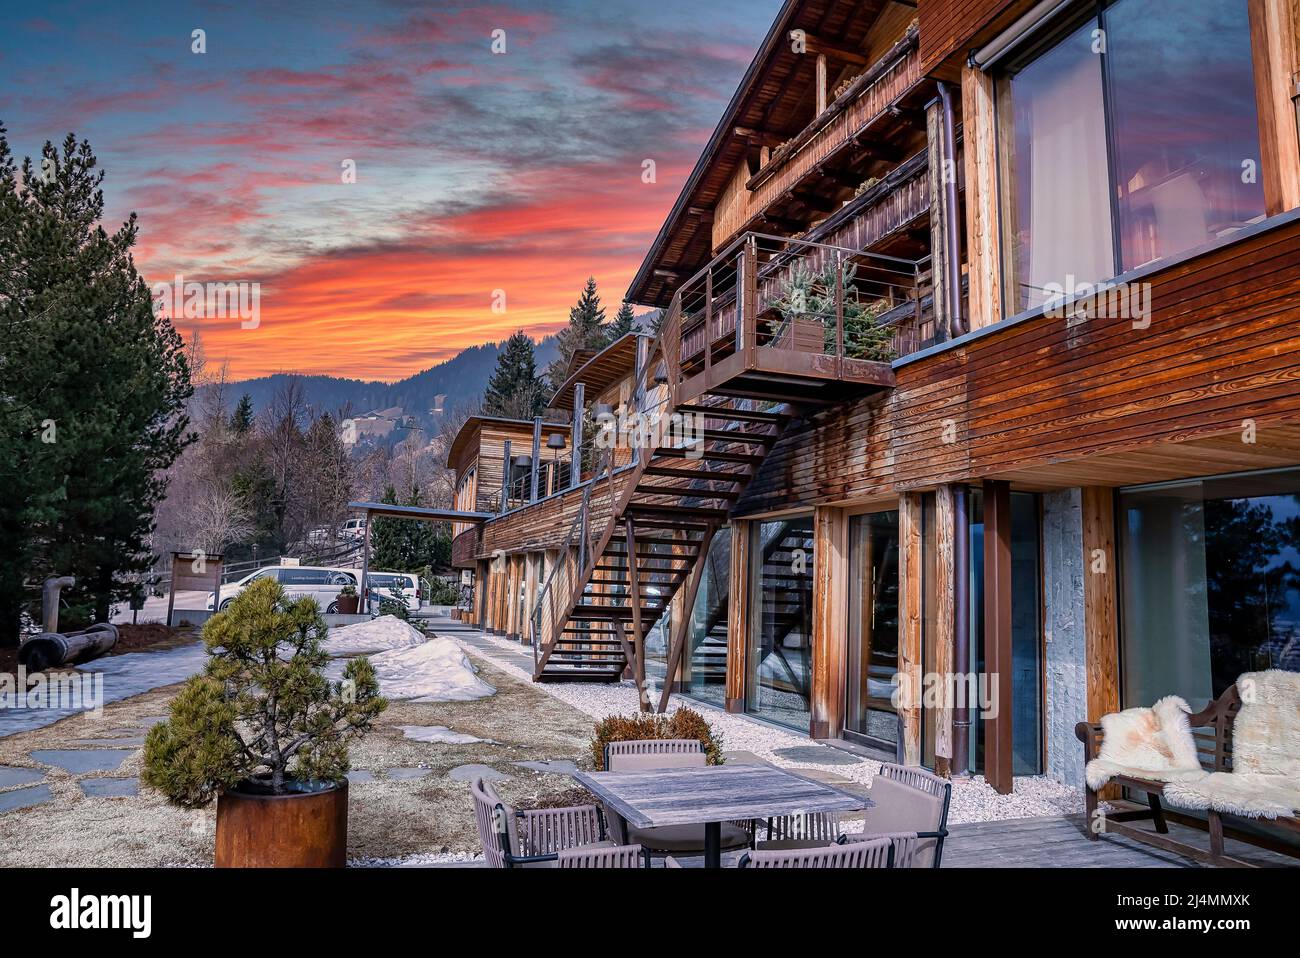 Beautiful wooden chalet hotel on slope of mountain during winter season Stock Photo